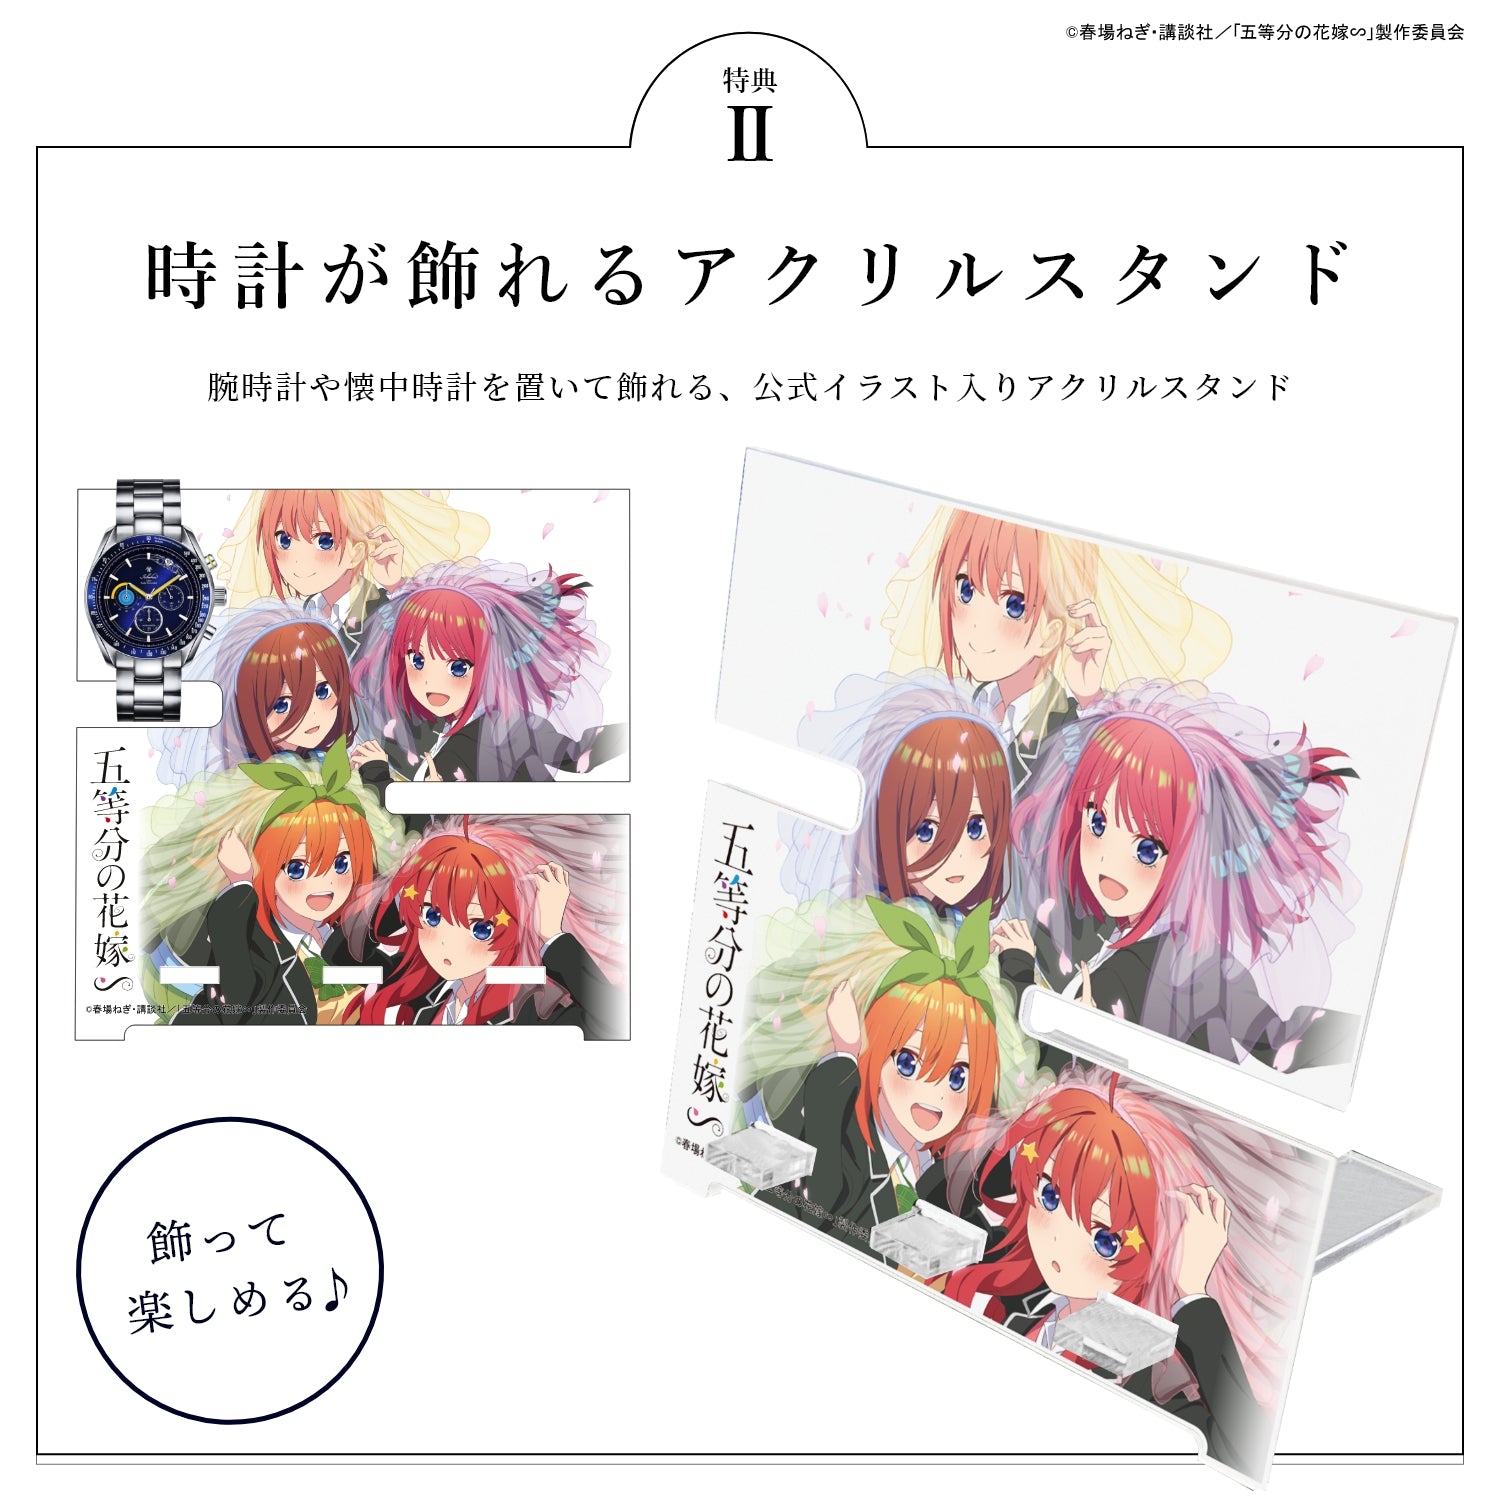 TV special anime“The Quintessential Quintuplets” Radio solar chronograph Winter special model change with belt| Yotsuba Nakano